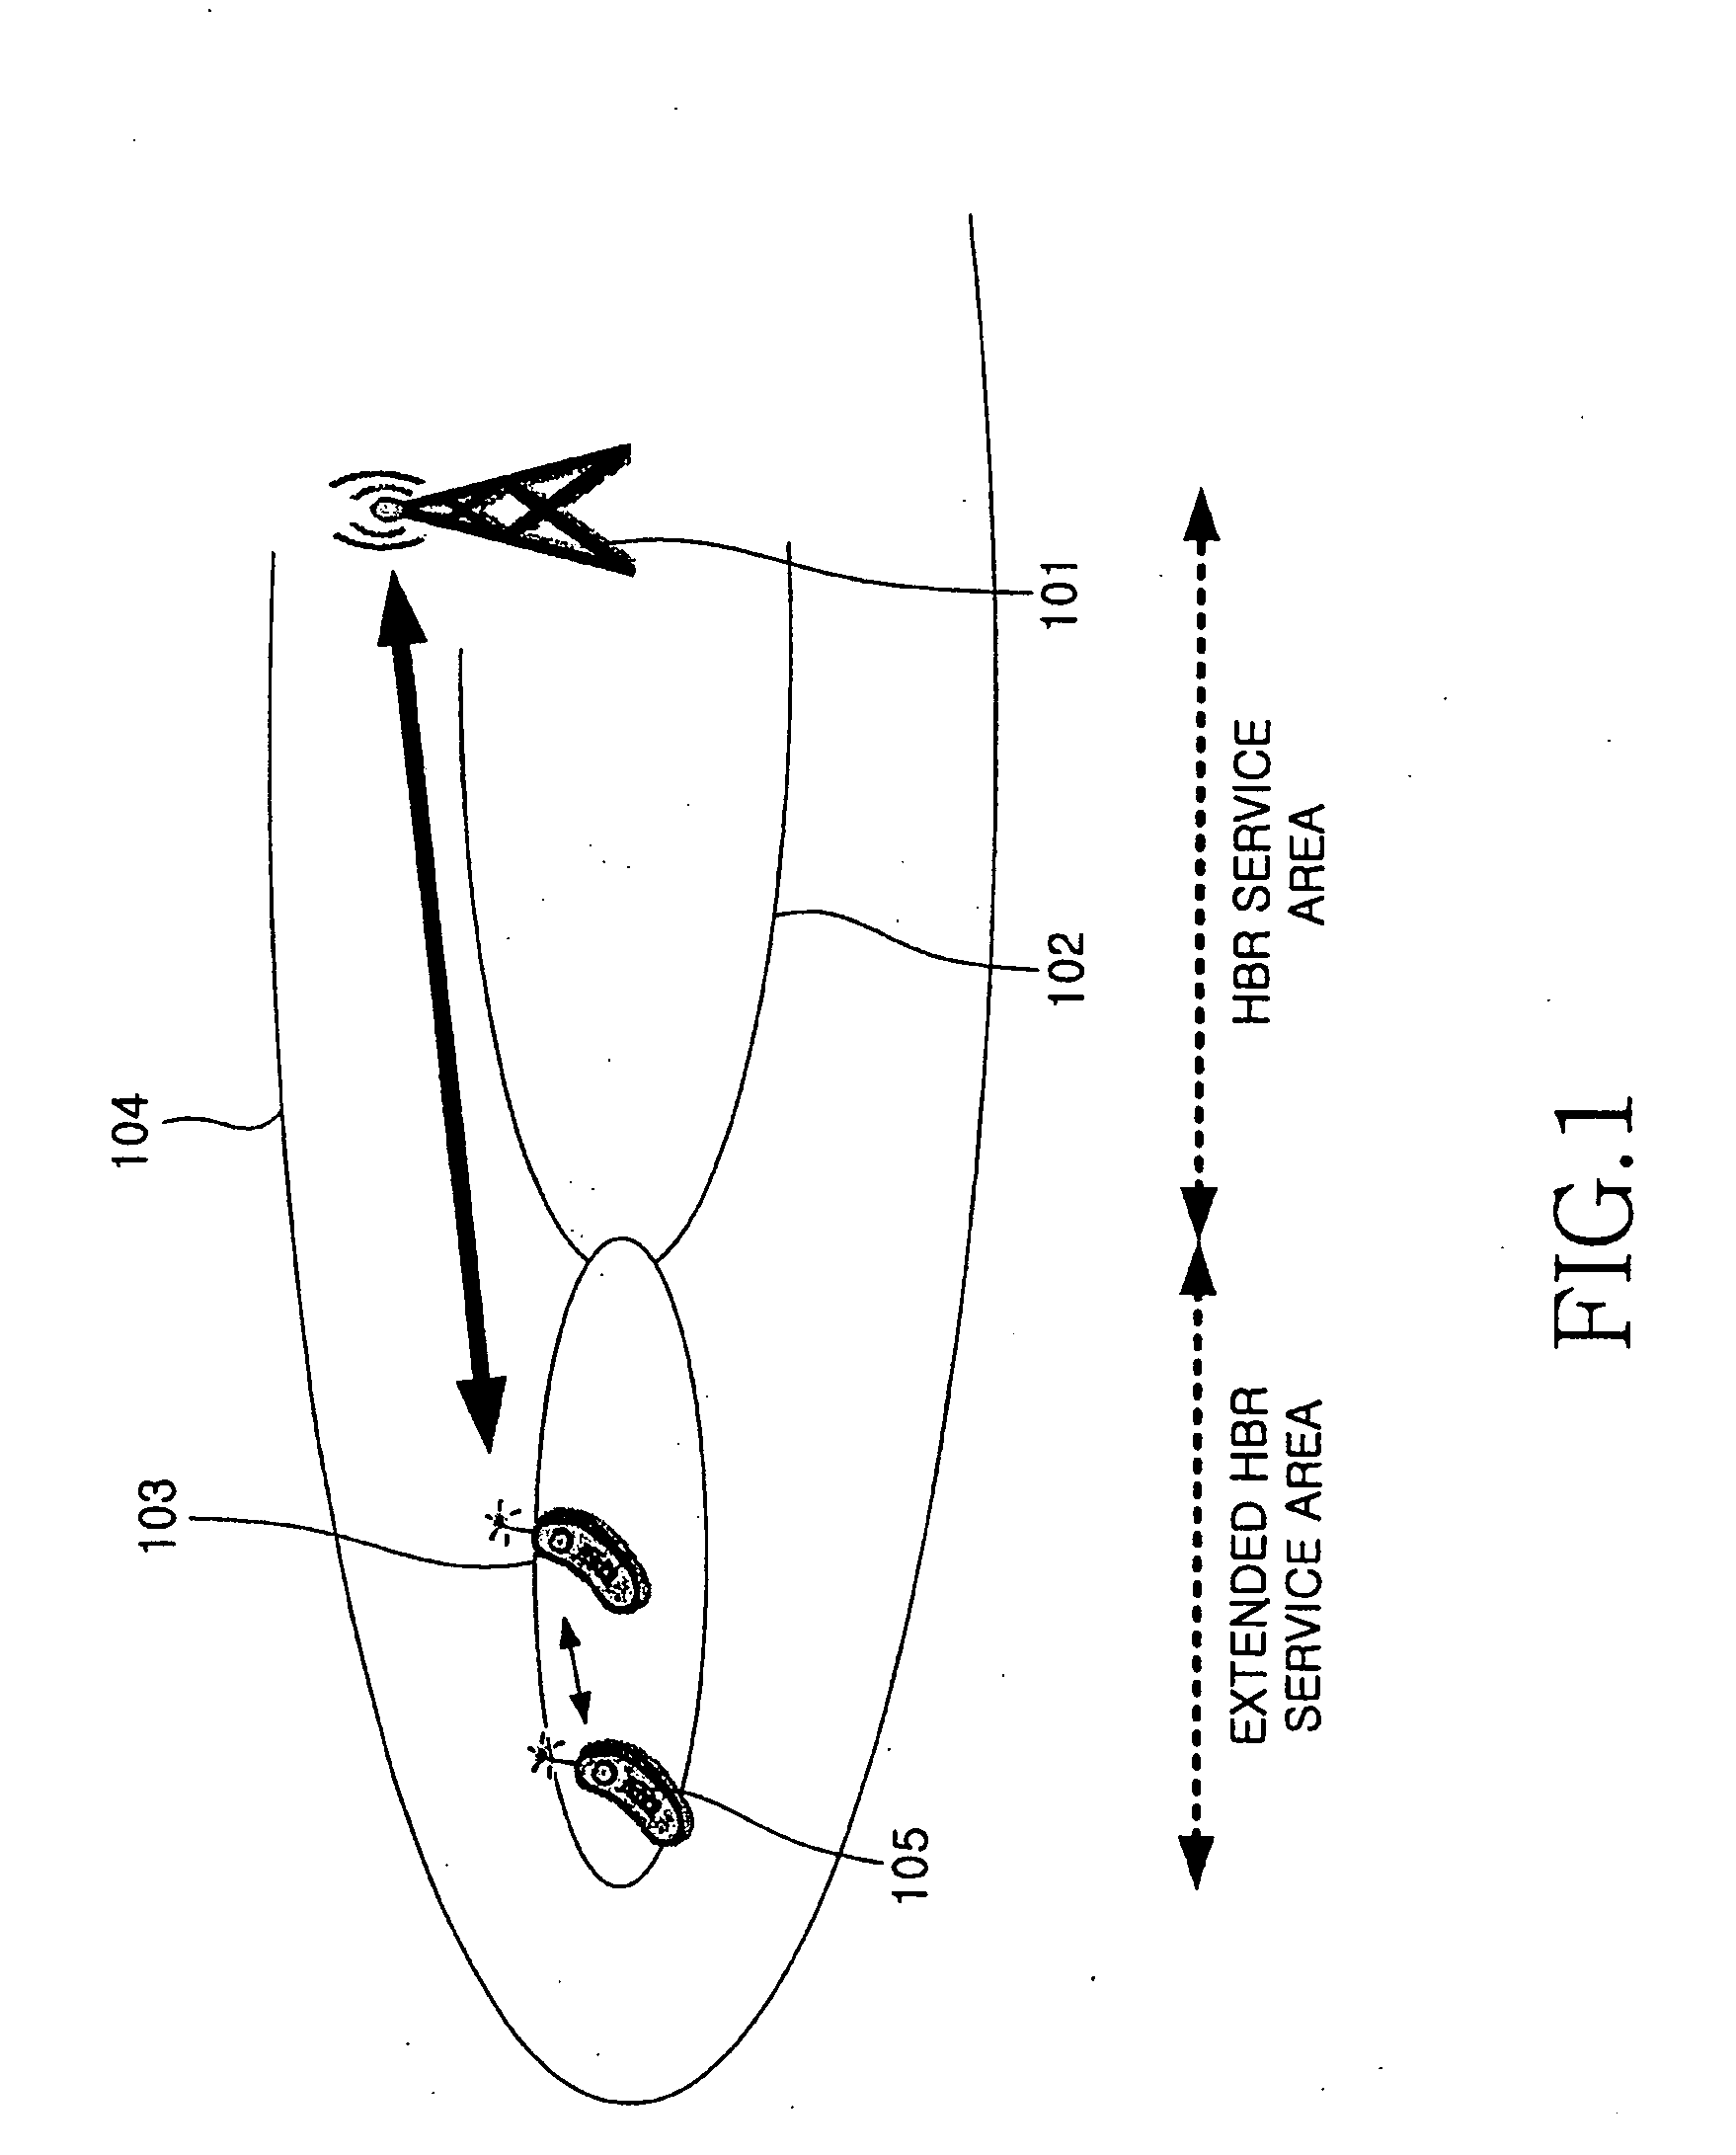 Relay communication method for an OFDMA-based cellular communication system